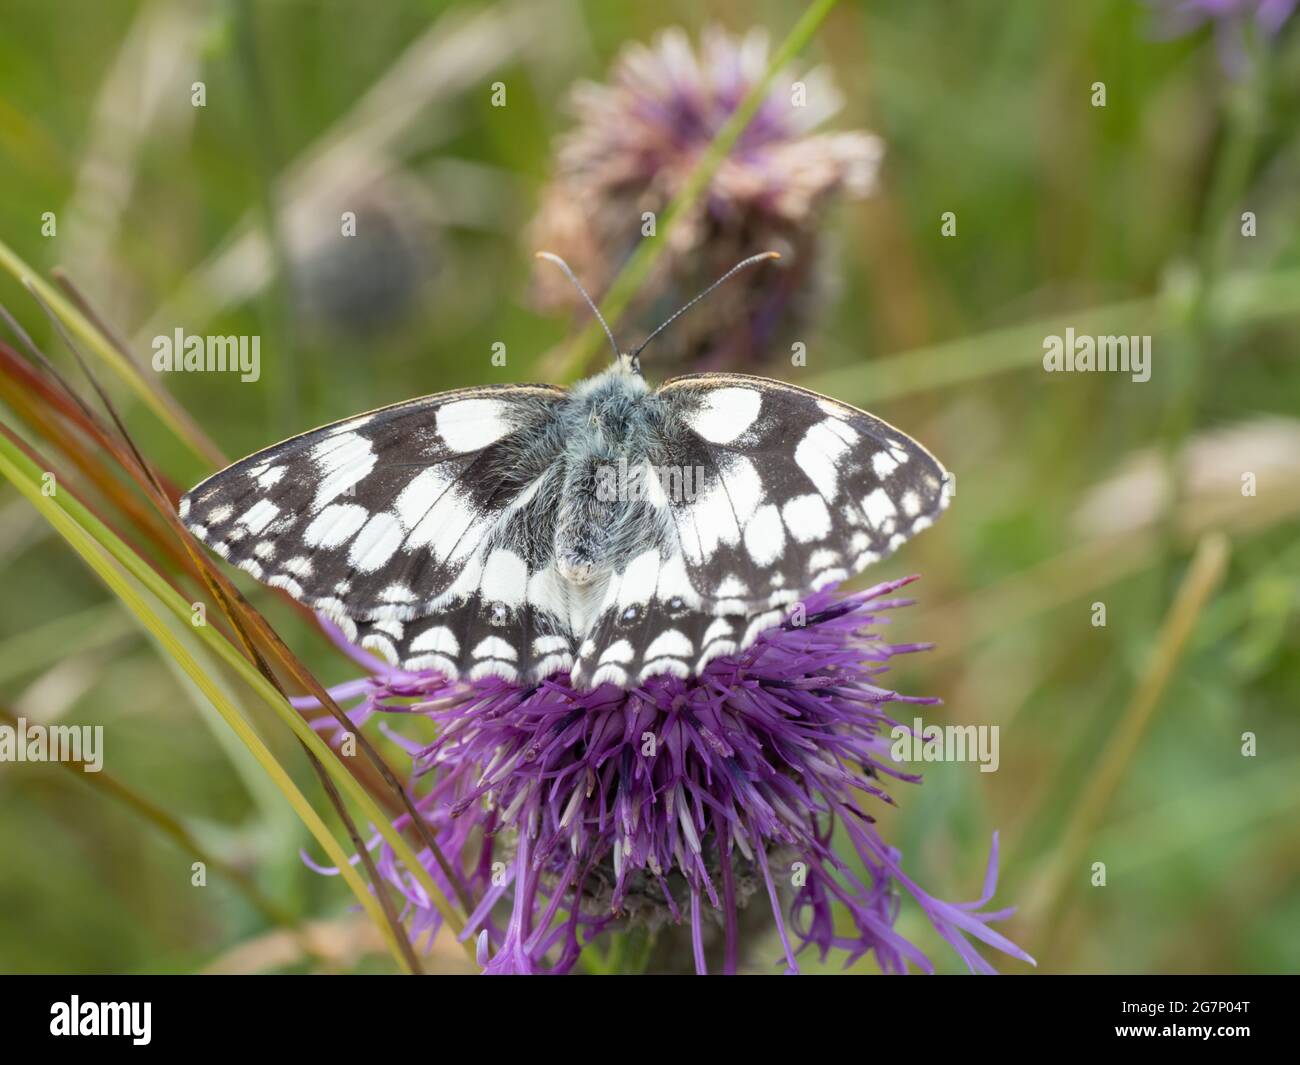 Melanargia galathea, the Marbled White Butterfly perched on a thistle flower. Stock Photo